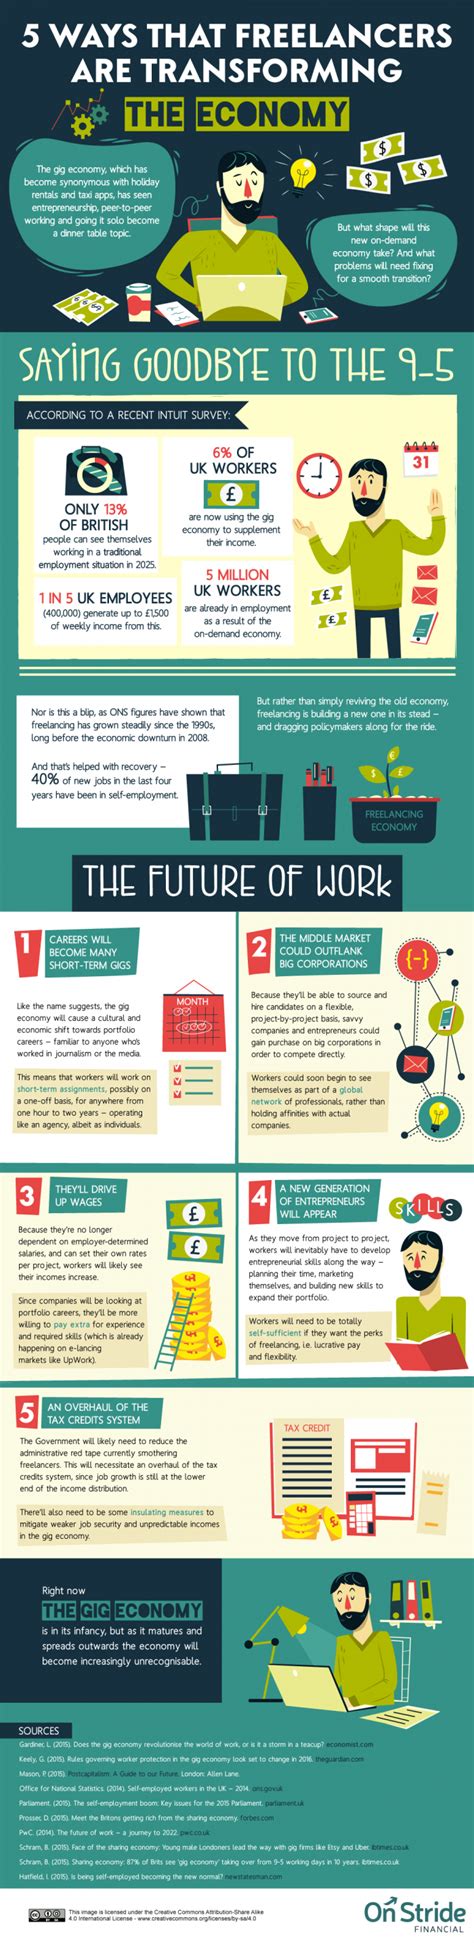 Infographic Five Ways That Freelancers Are Transforming The Economy